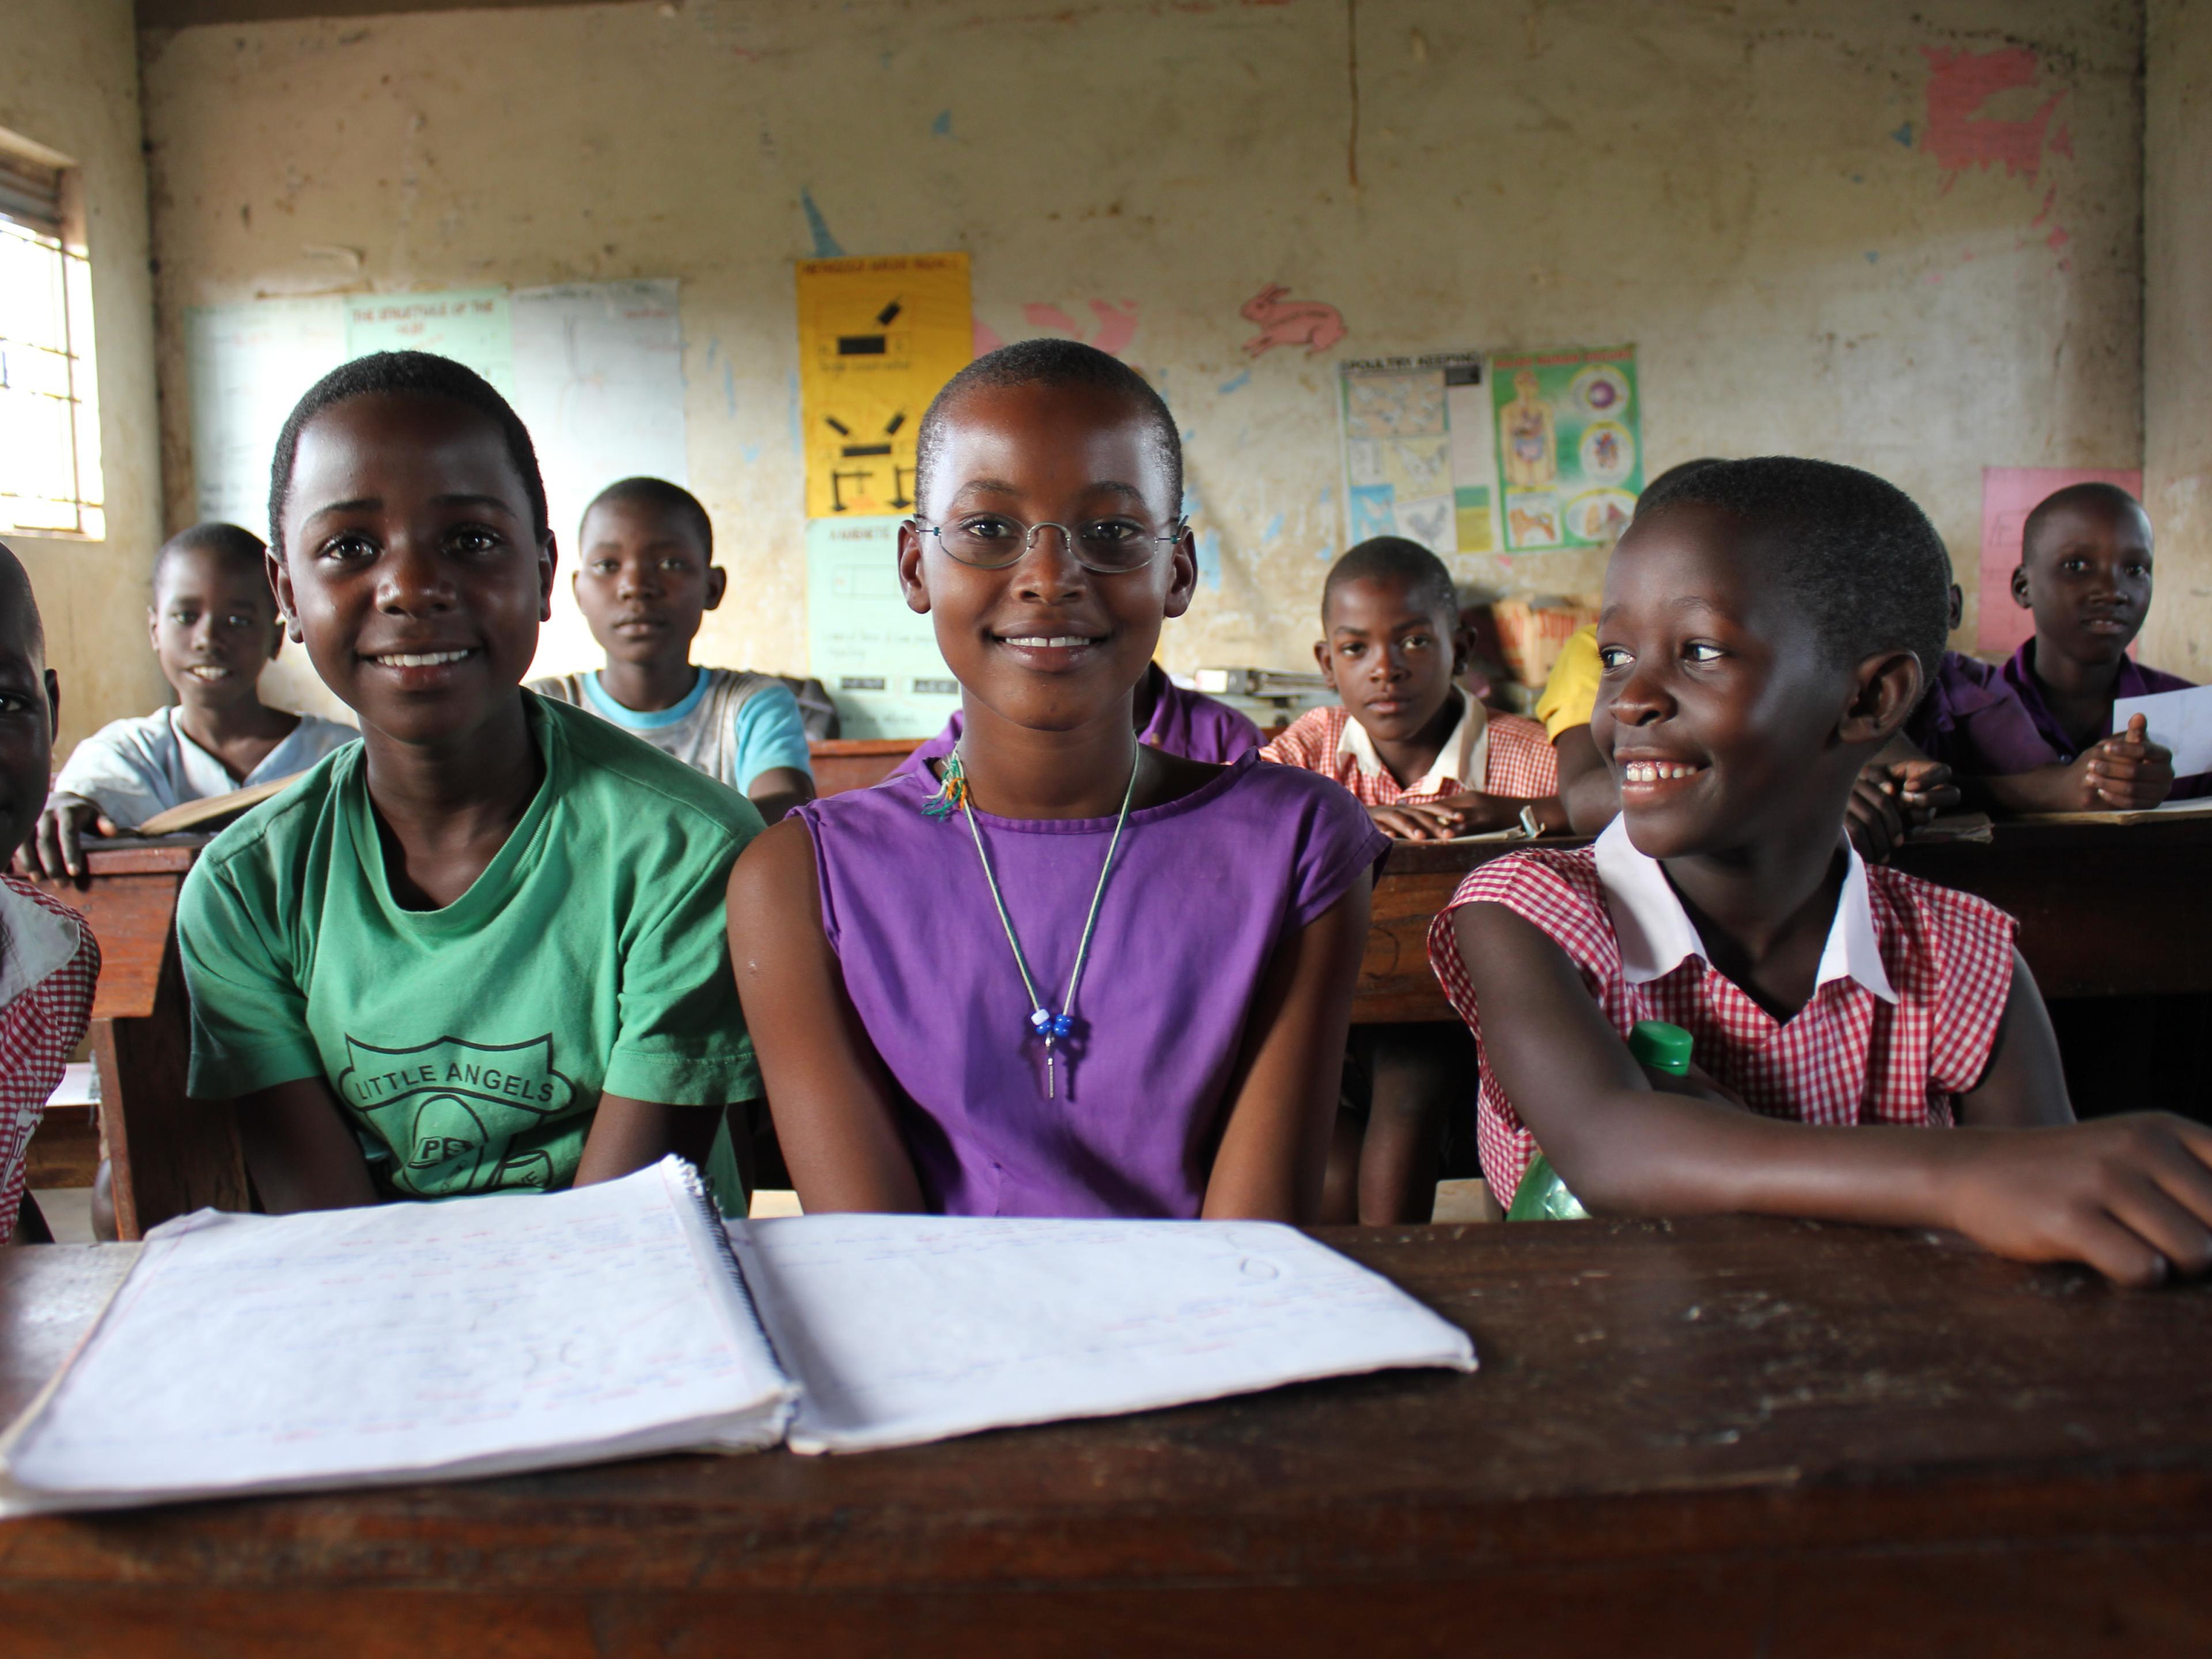 Pupils from Uganda in the classroom, one wearing OneDollarGlasses